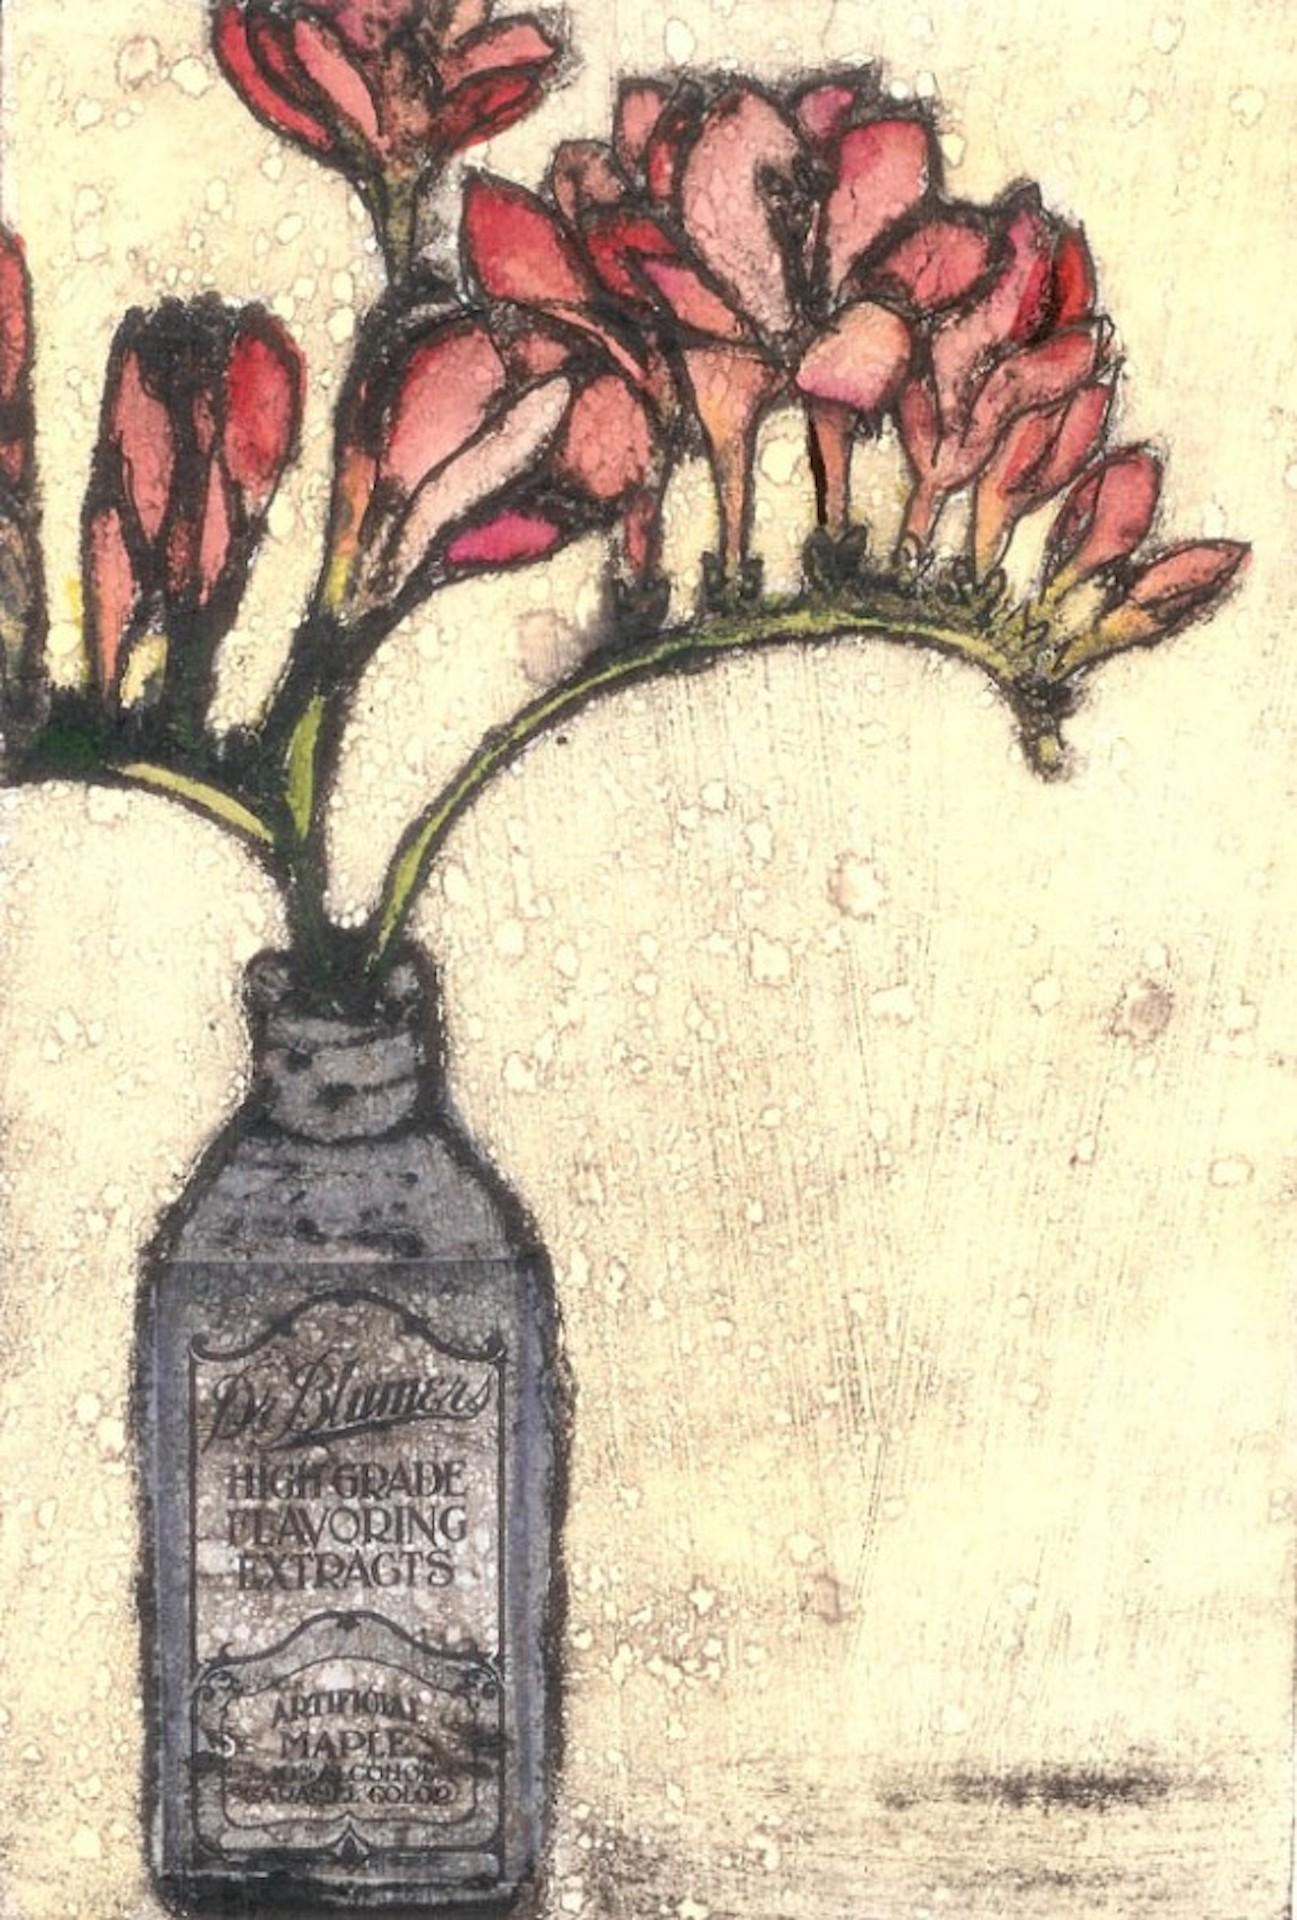 Small Bottles two by Vicky Oldfield [2014]
limited edition

Collagraph

Edition of 30

Image size: H:18 cm x W:12 cm

Complete Size of Unframed Work: H:24 cm x W:18 cm x D:0.1cm

Sold Unframed

Please note that insitu images are purely an indication